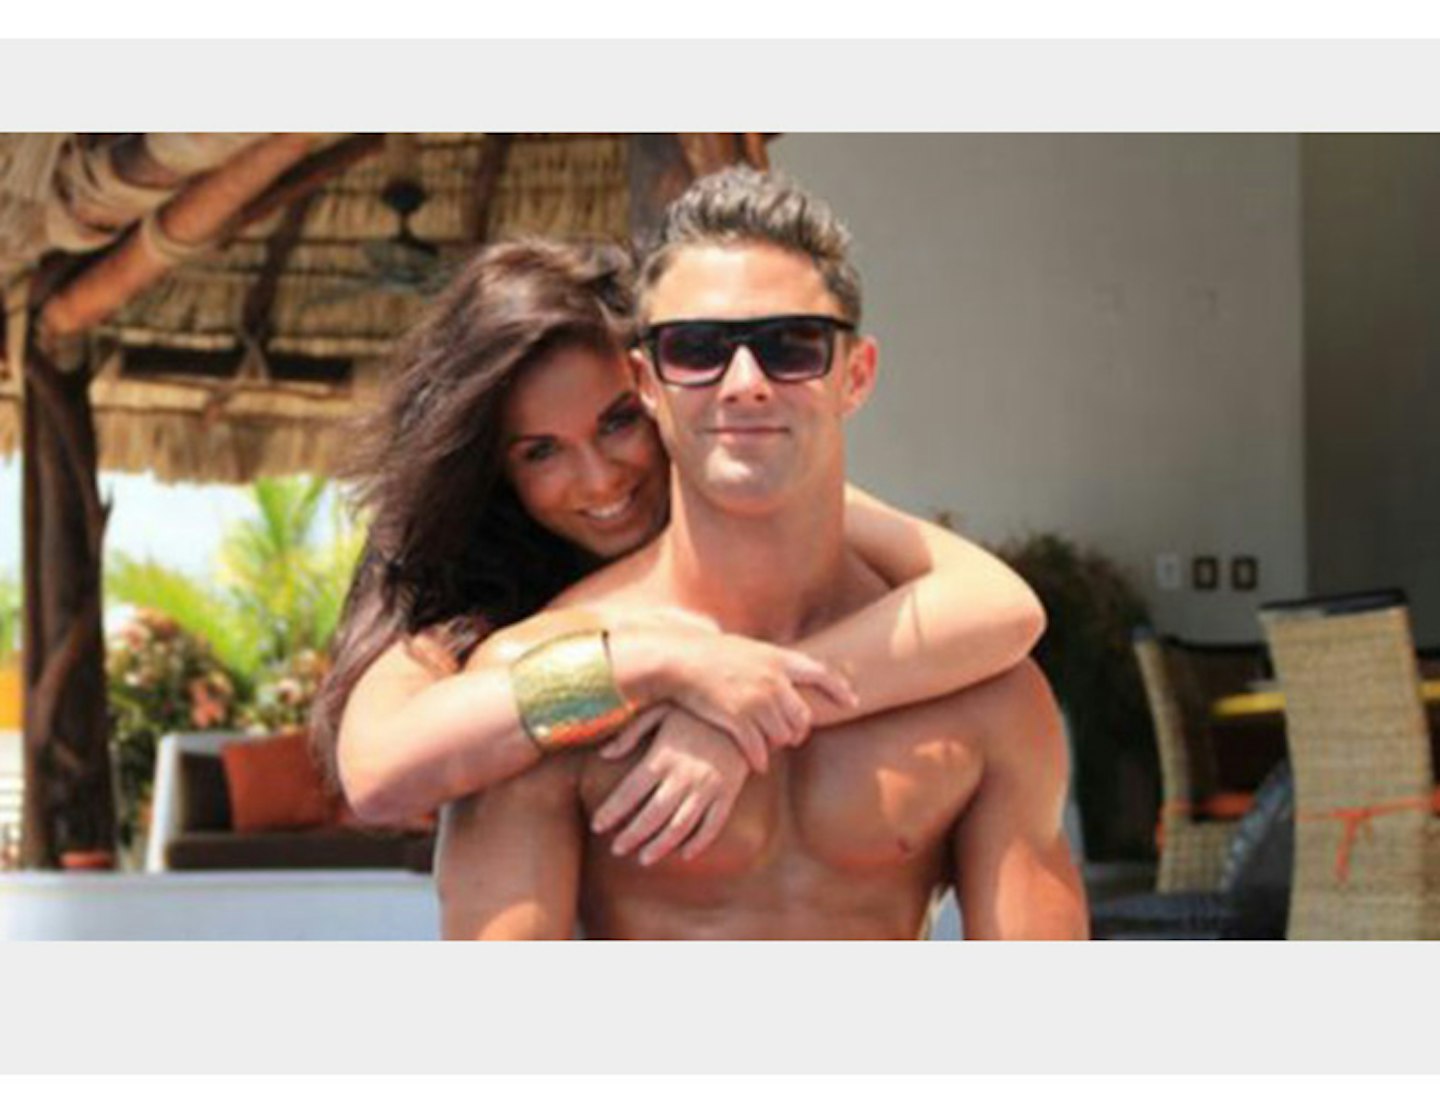 Vicky and Ricci got engaged in 2013 &ndash; but split shortly afterwards